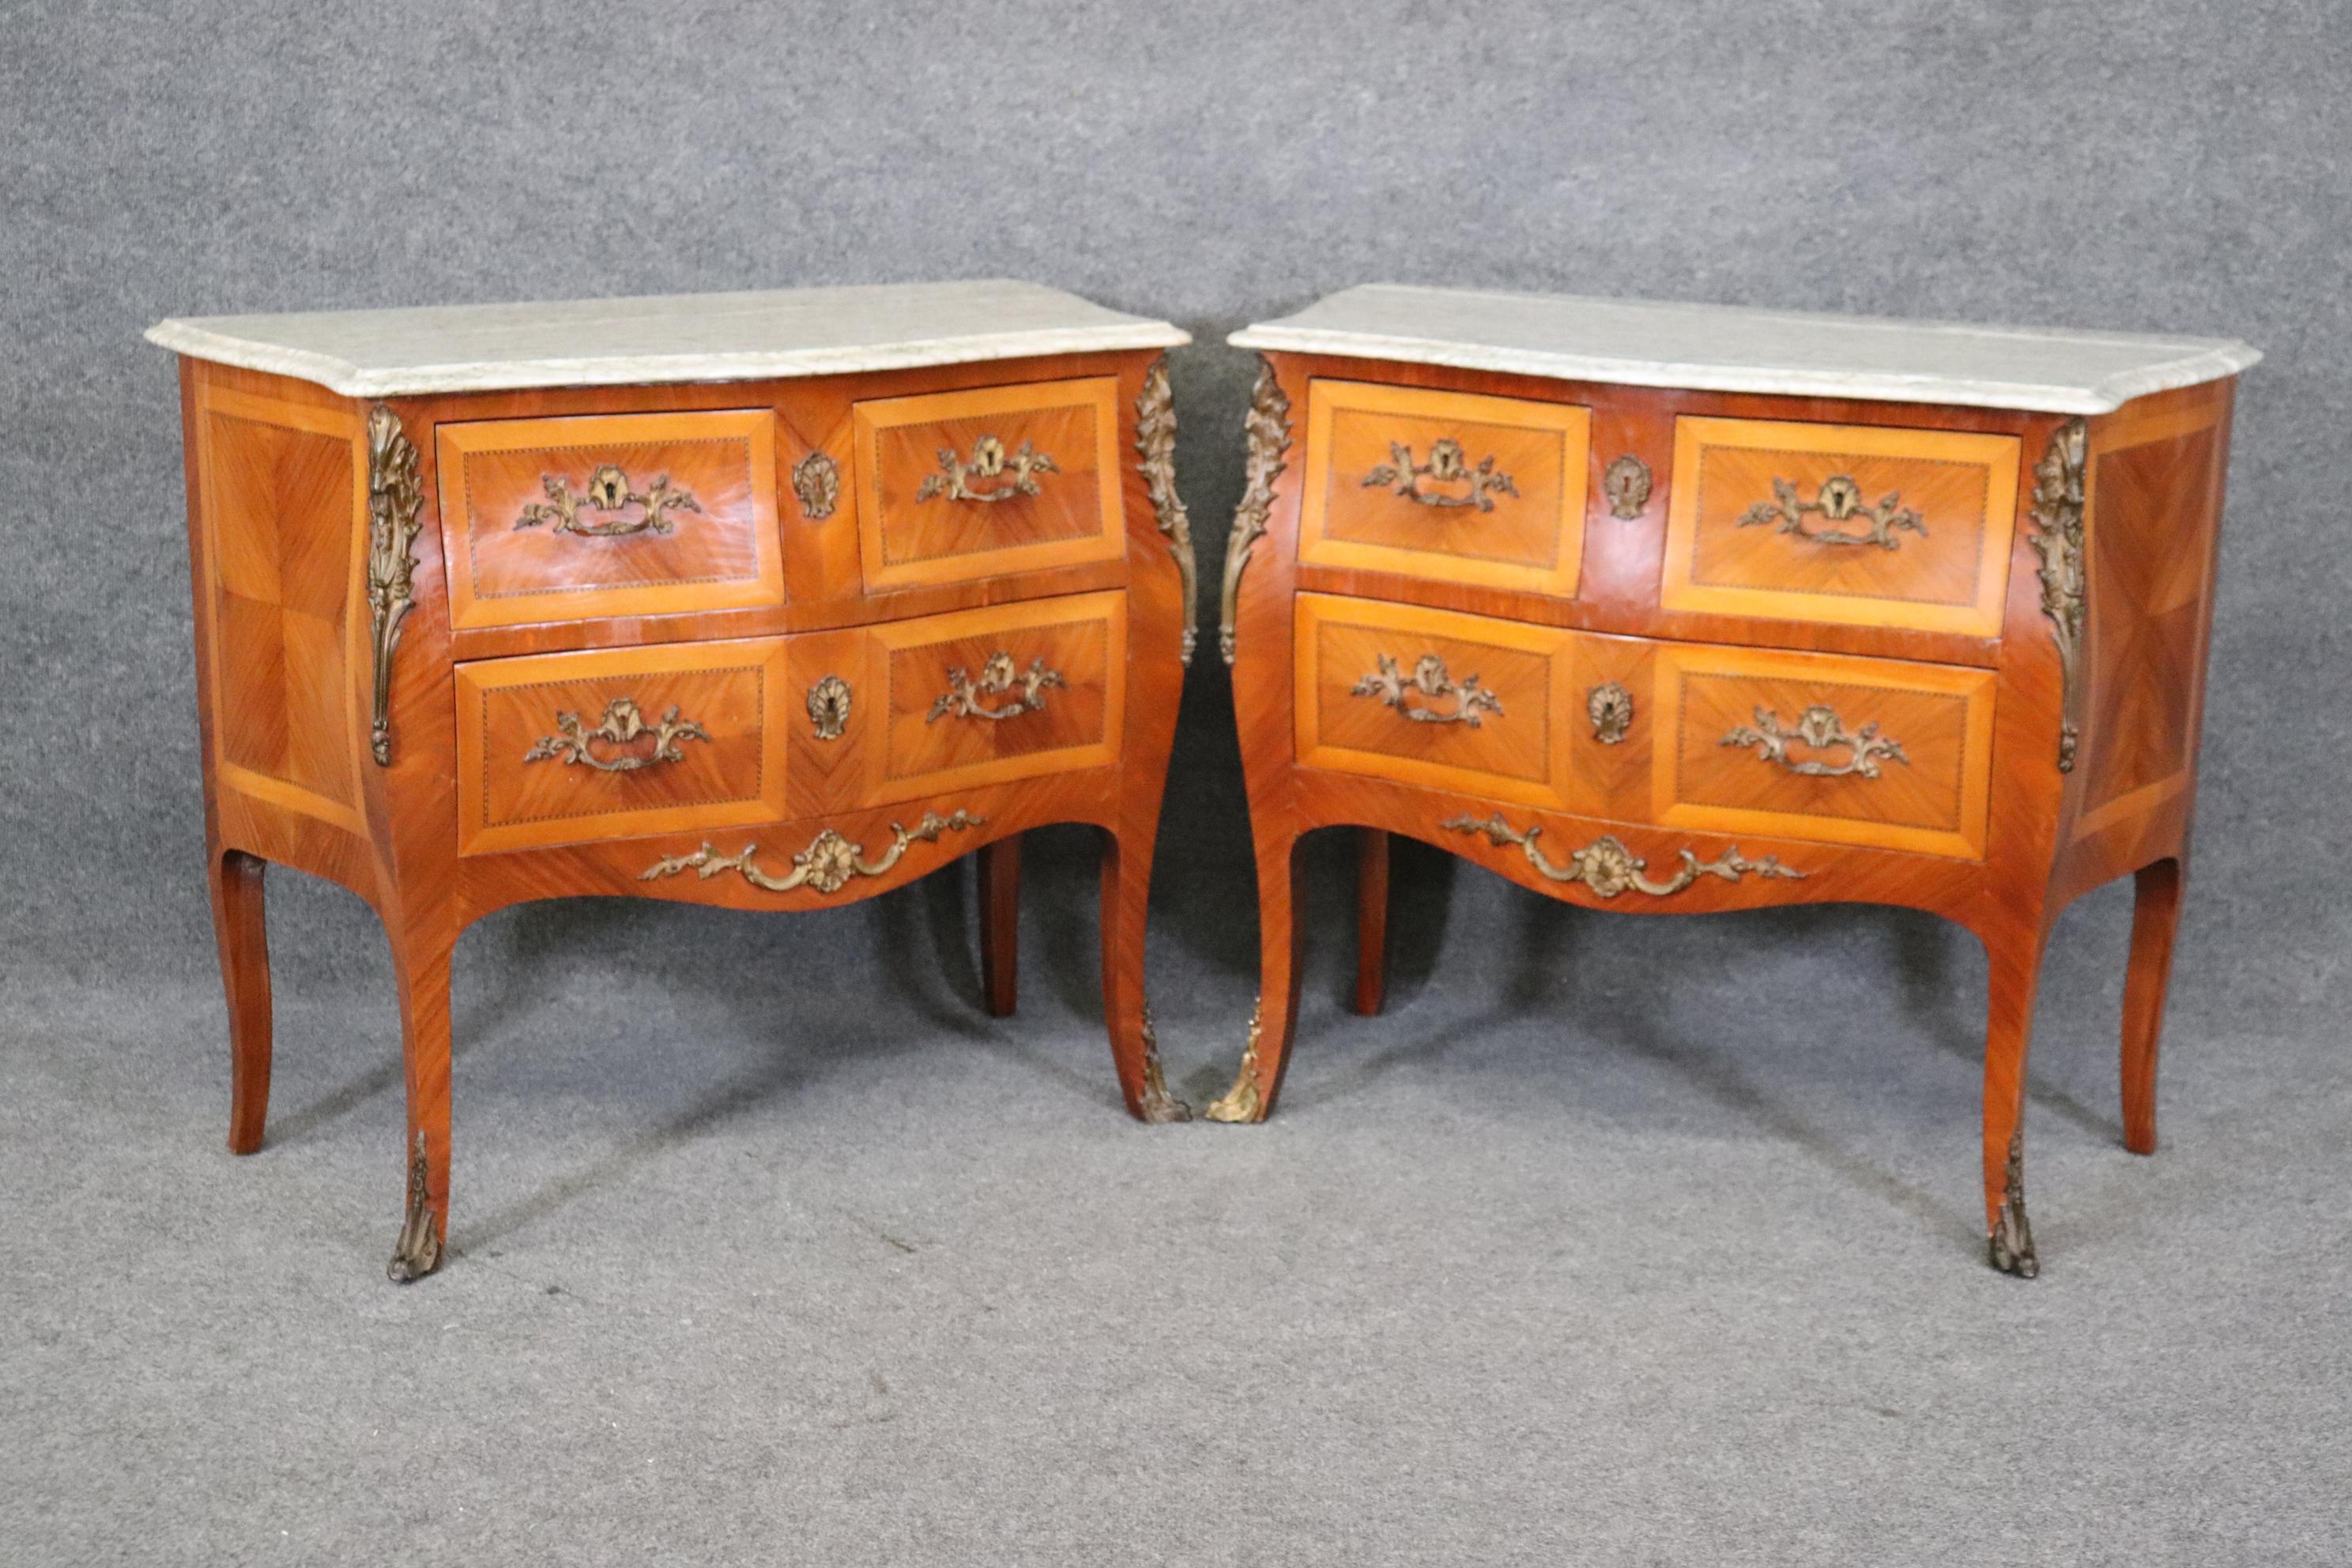 This is a gorgeous pair of satinwood and kingwood marble top commodes with beautifully simple bronze mounts and superb lace marble tops. They are in good condition and hard to find in this two drawer configuration. They won't be around long. They